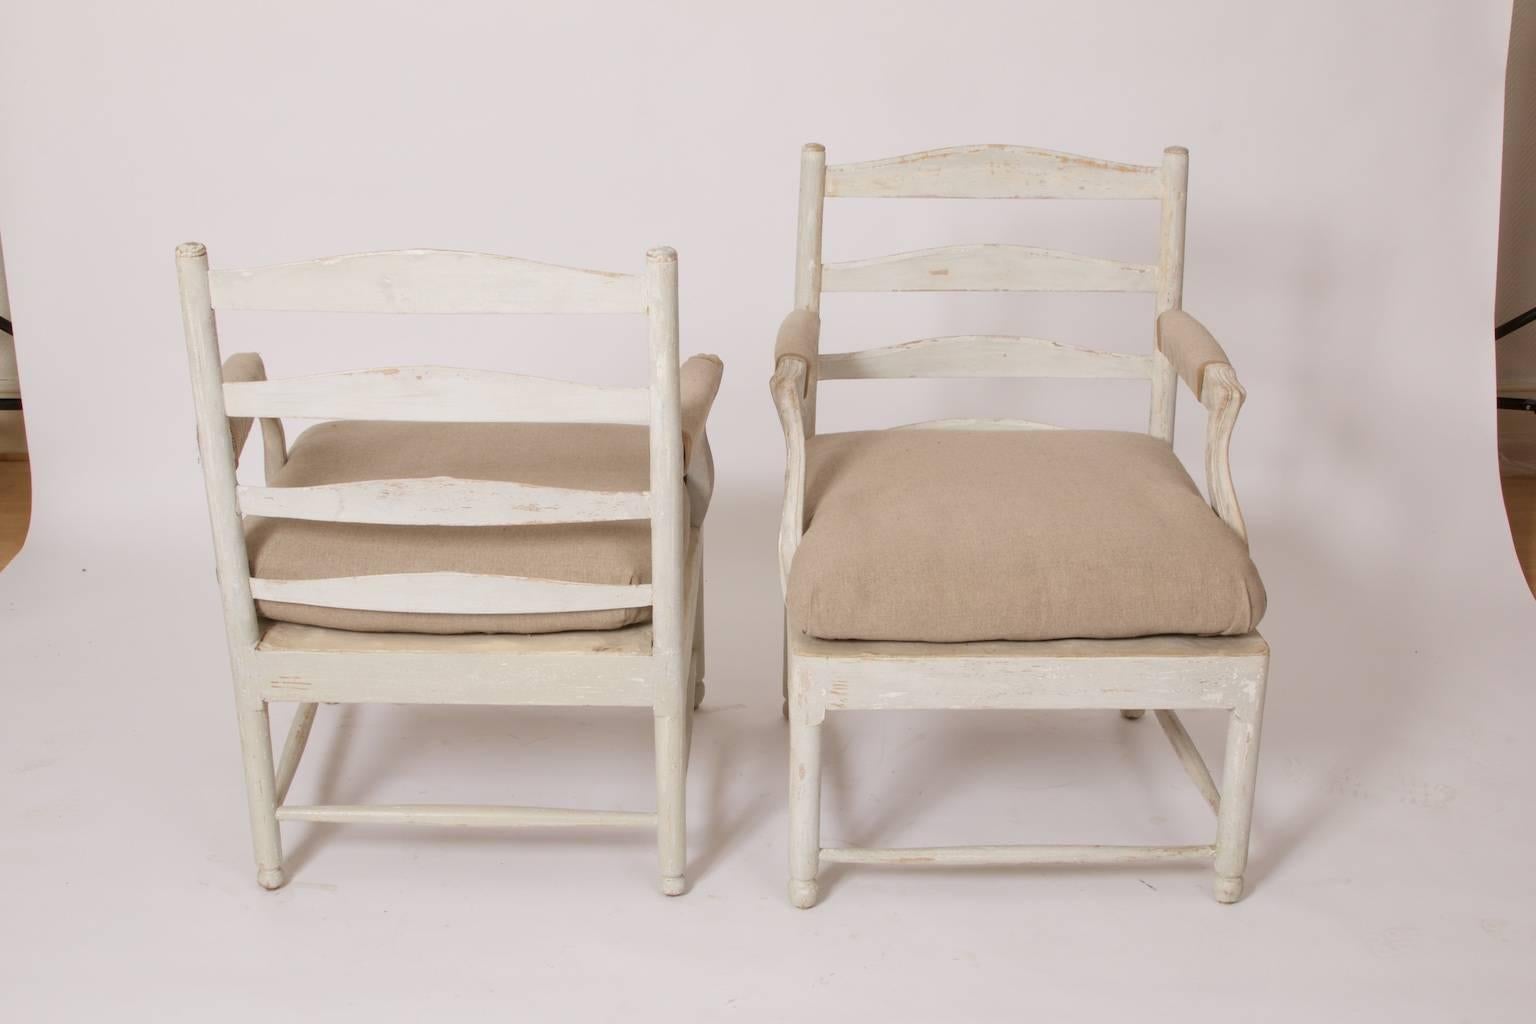 A pair of armchairs, Gripsholm, Sweden, circa 1790.
Dry scraped to original color and retouched.

This beautiful armchair called Gripsholm named after the royal castle with the same name located outside Stockholm at lake Mälaren. King s Gustav